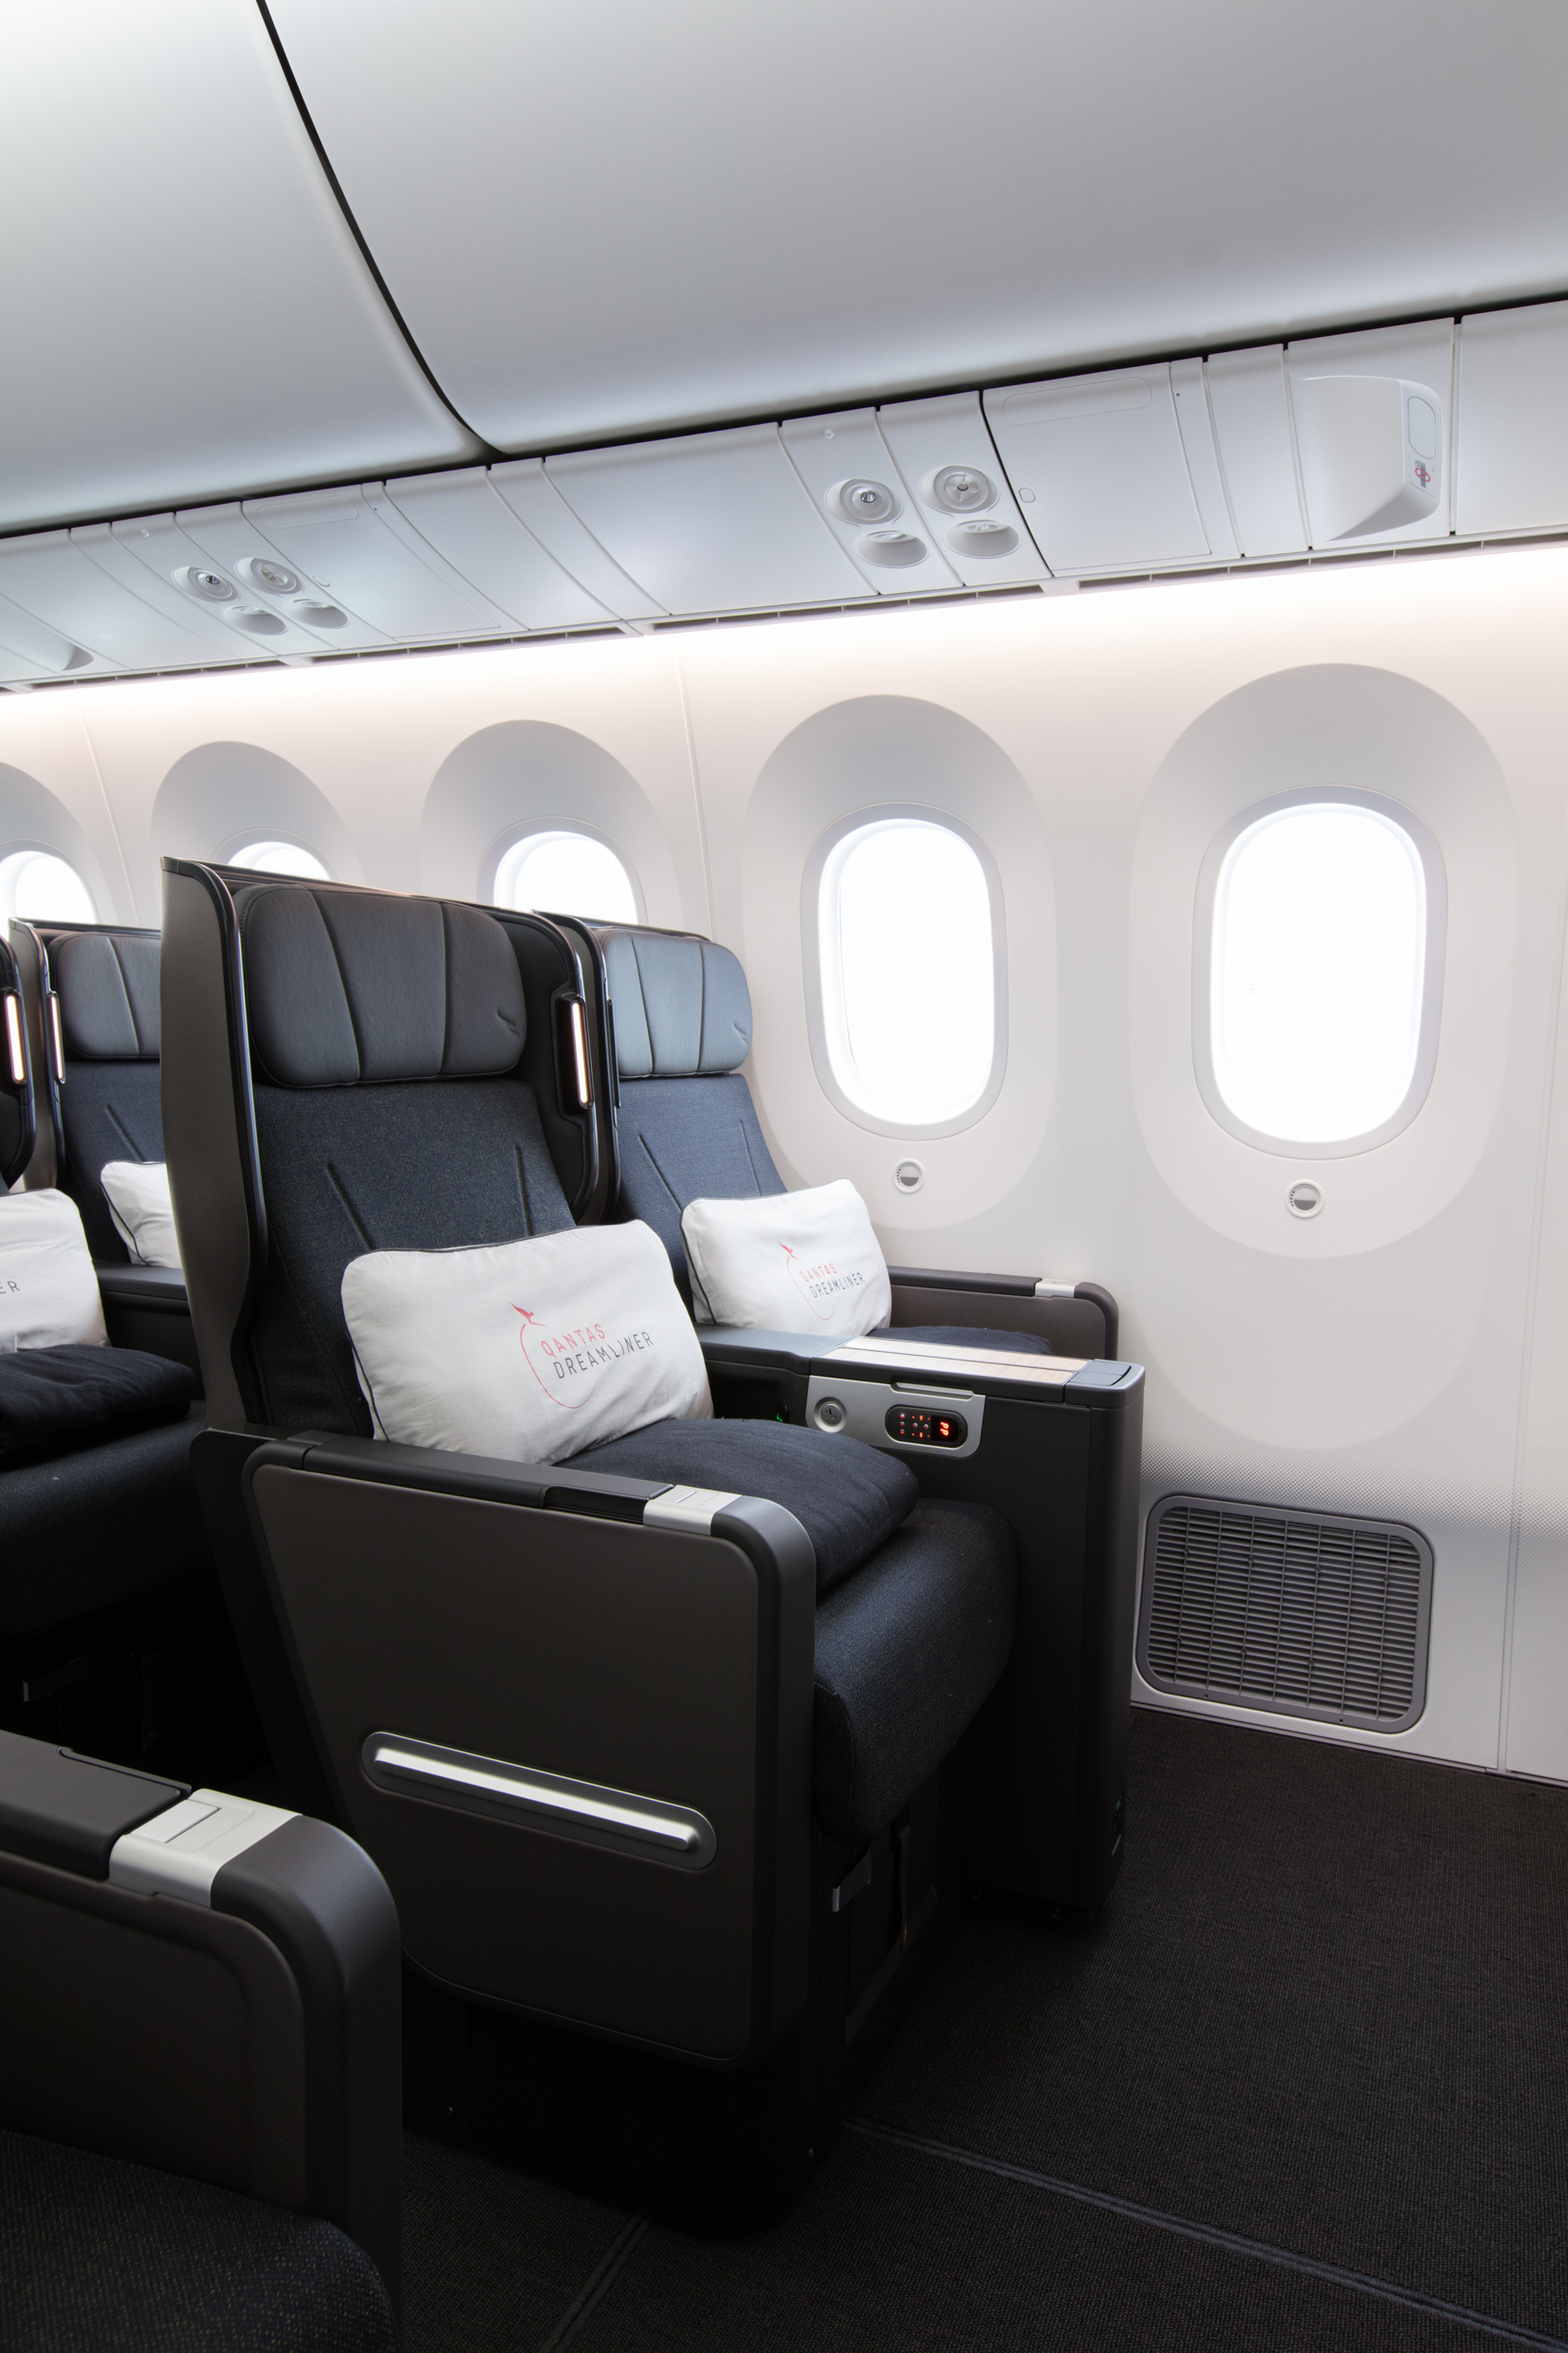 Qantas Shows Off New Boeing 787 9 Aircraft Thedesignair